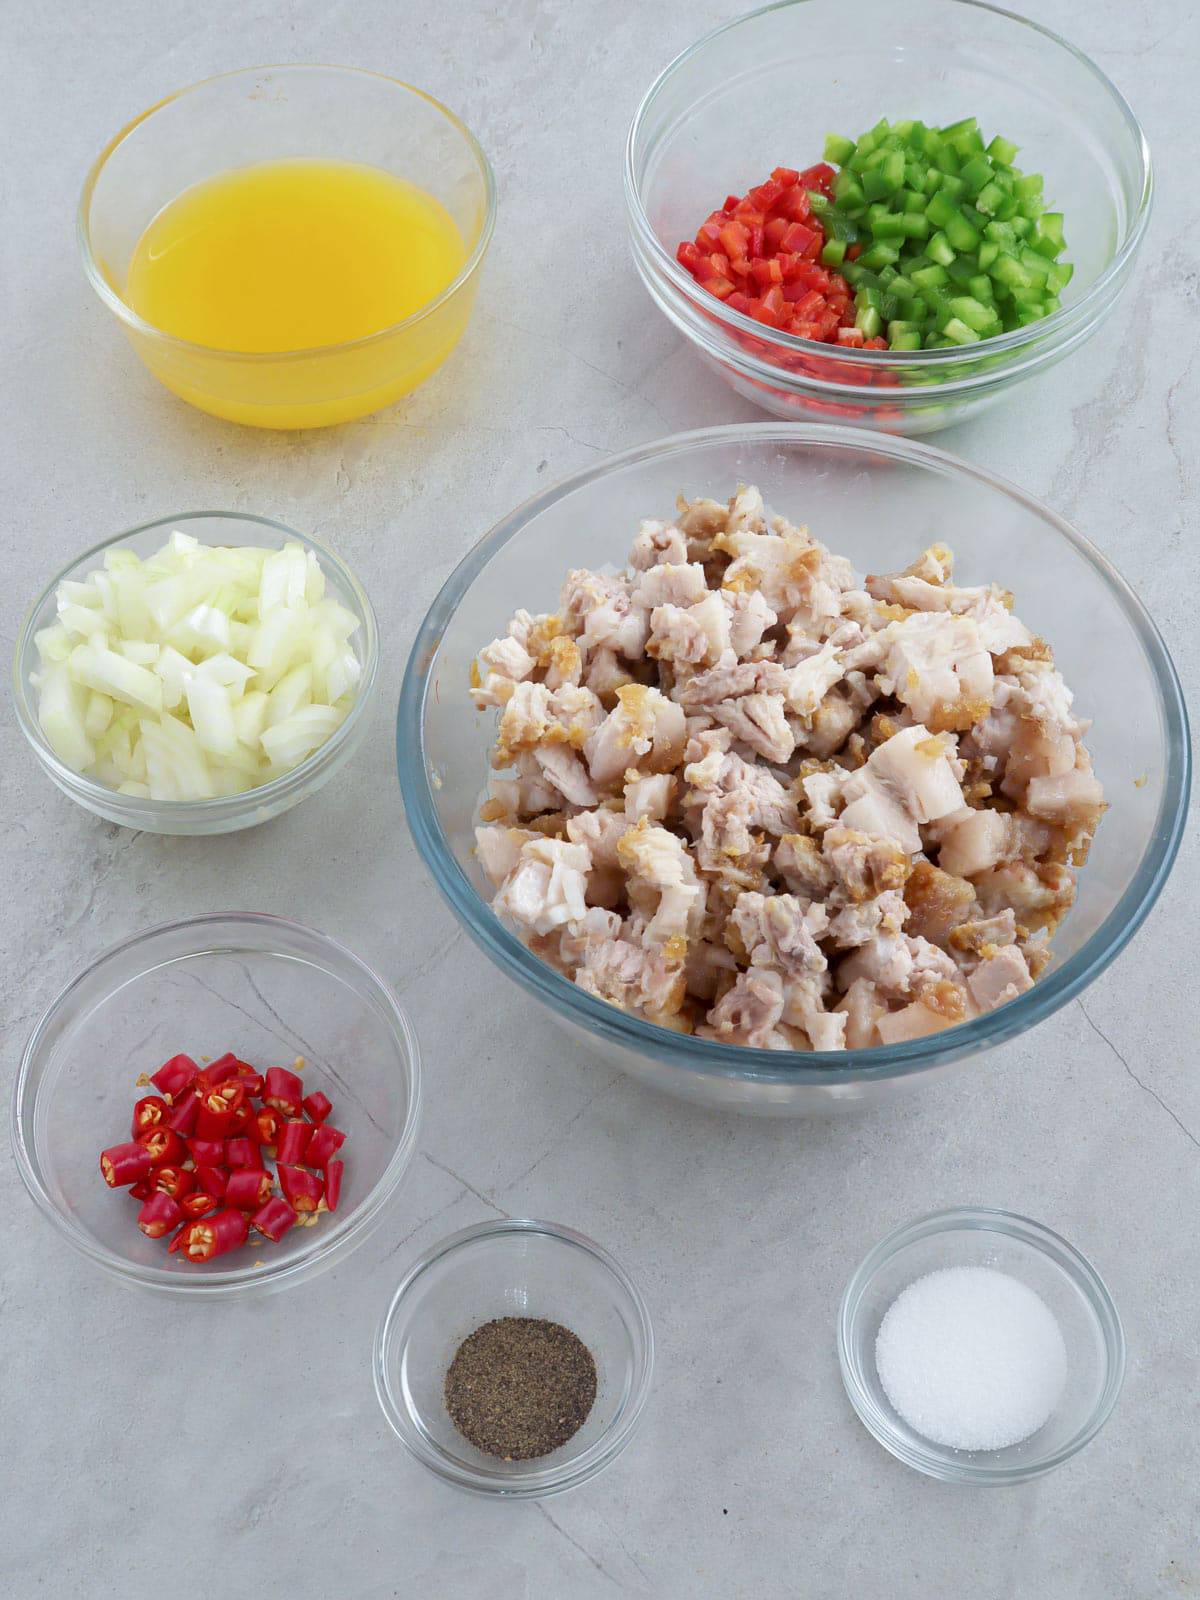 chopped lechon kawali, bell peppers, onions, chili peppers, lemon juice, salt, and pepper in individual bowls